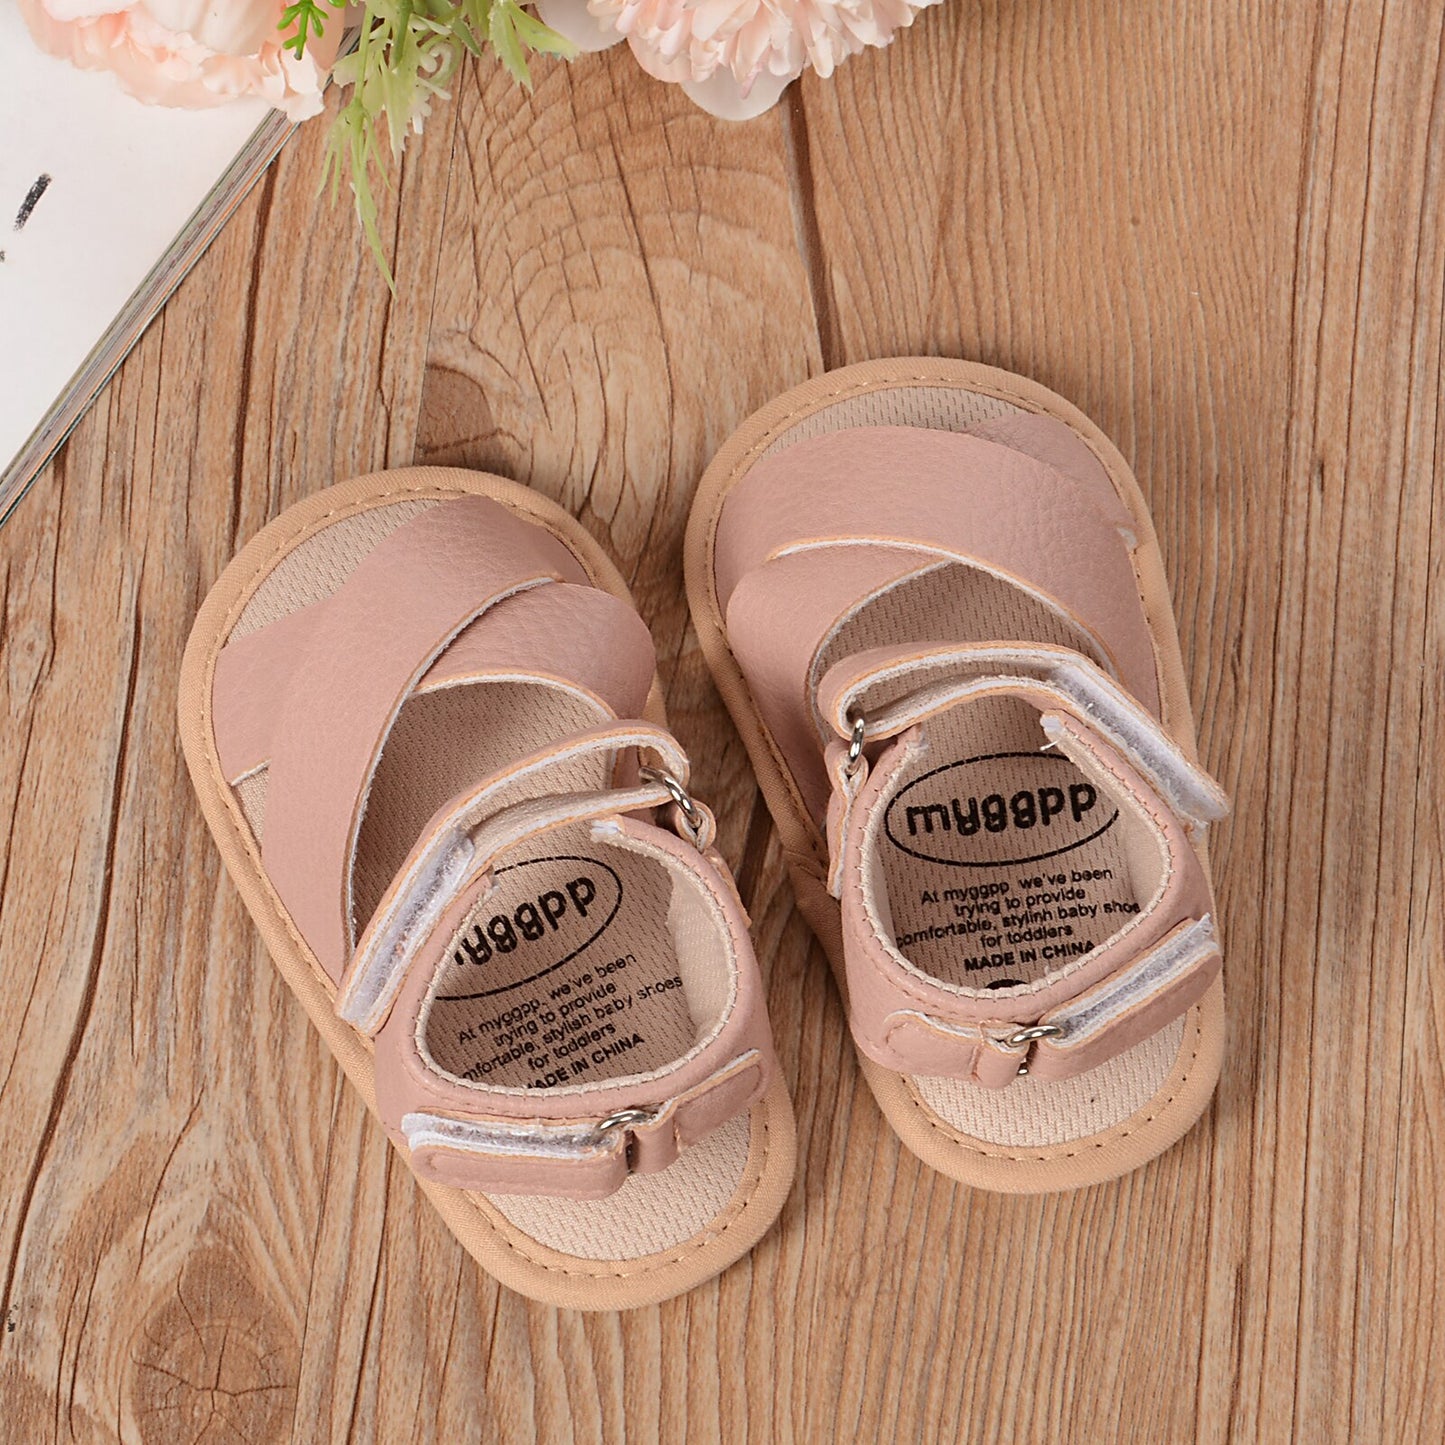 Baby Boys Girls Leather Sandals*